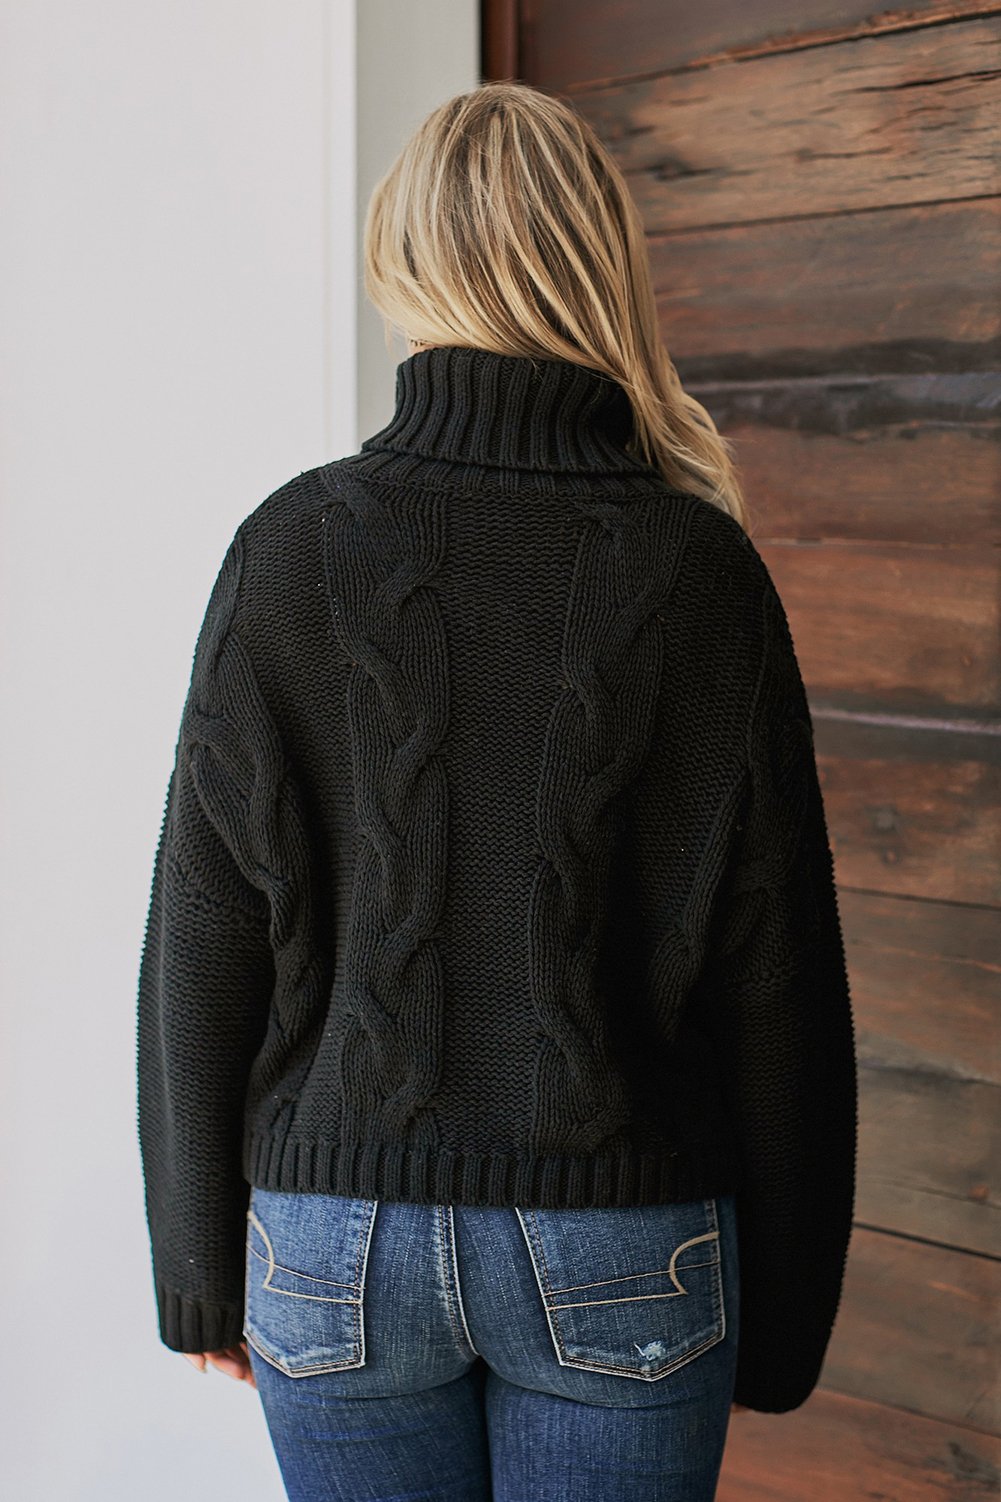 Picture of a Women's Cuddle Approved Cable Knit Handmade Turtleneck Sweater black back